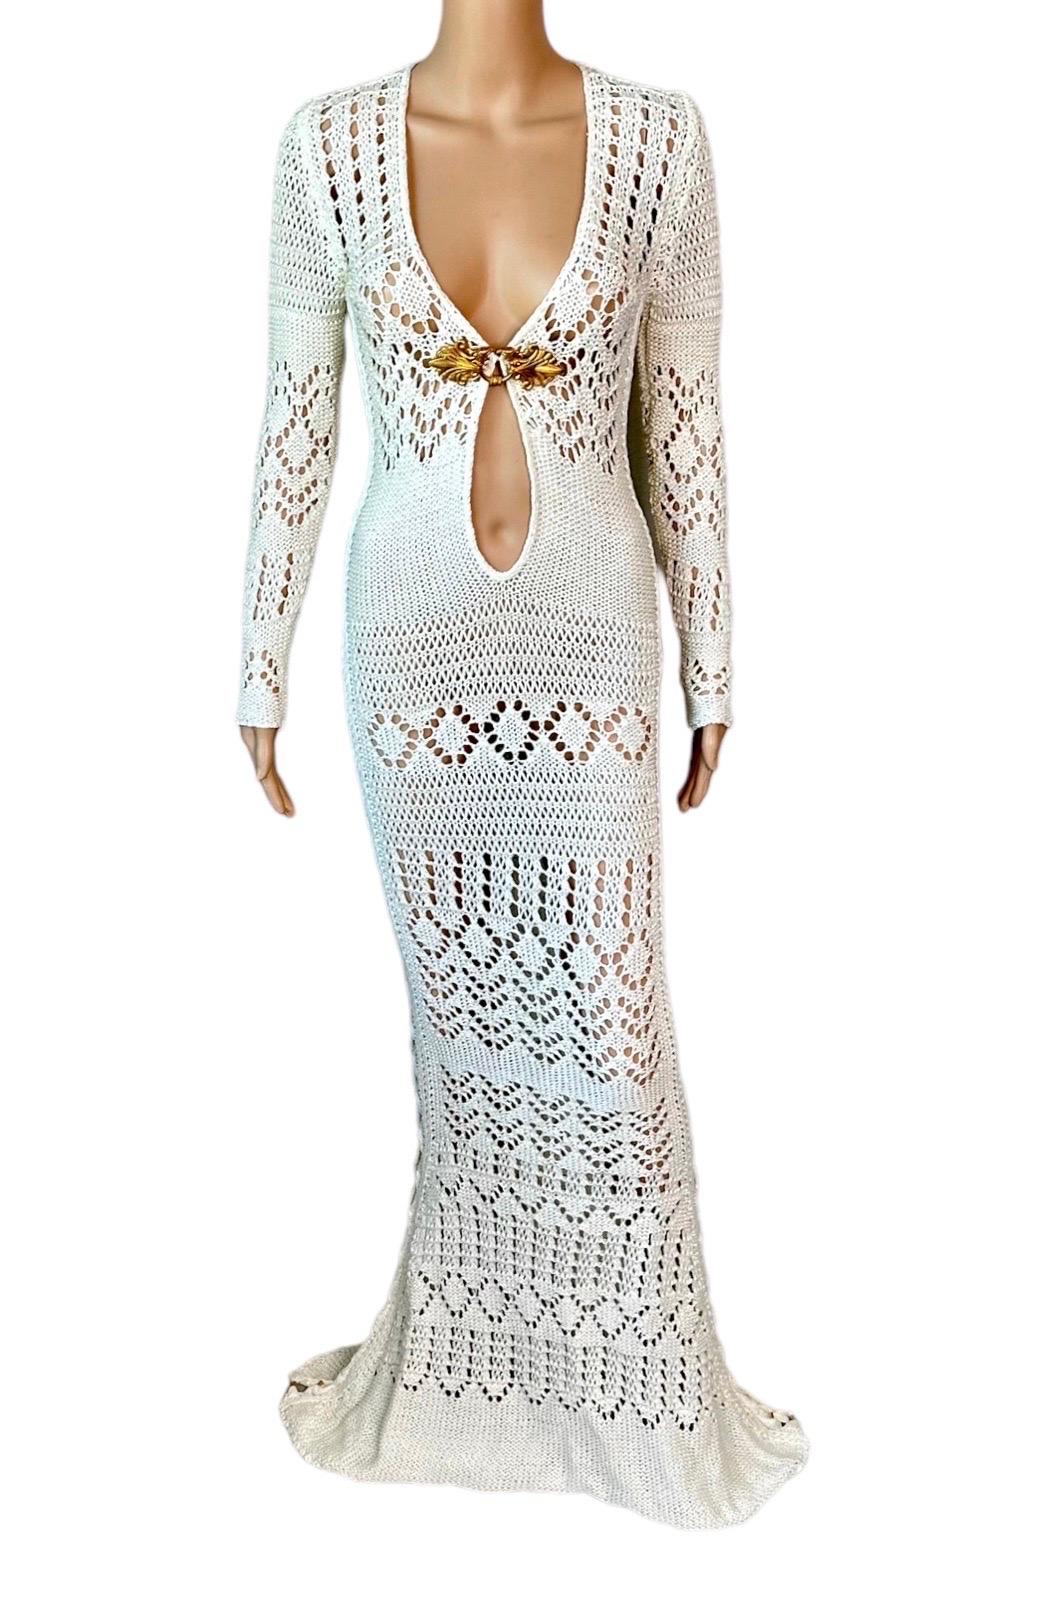 Emilio Pucci S/S 2011 Runway Unworn Embellished Cutout Crochet Open Knit Dress IT 42

Look 8 from the Spring 2011 Collection by Peter Dundas.

Condition: New with Tags